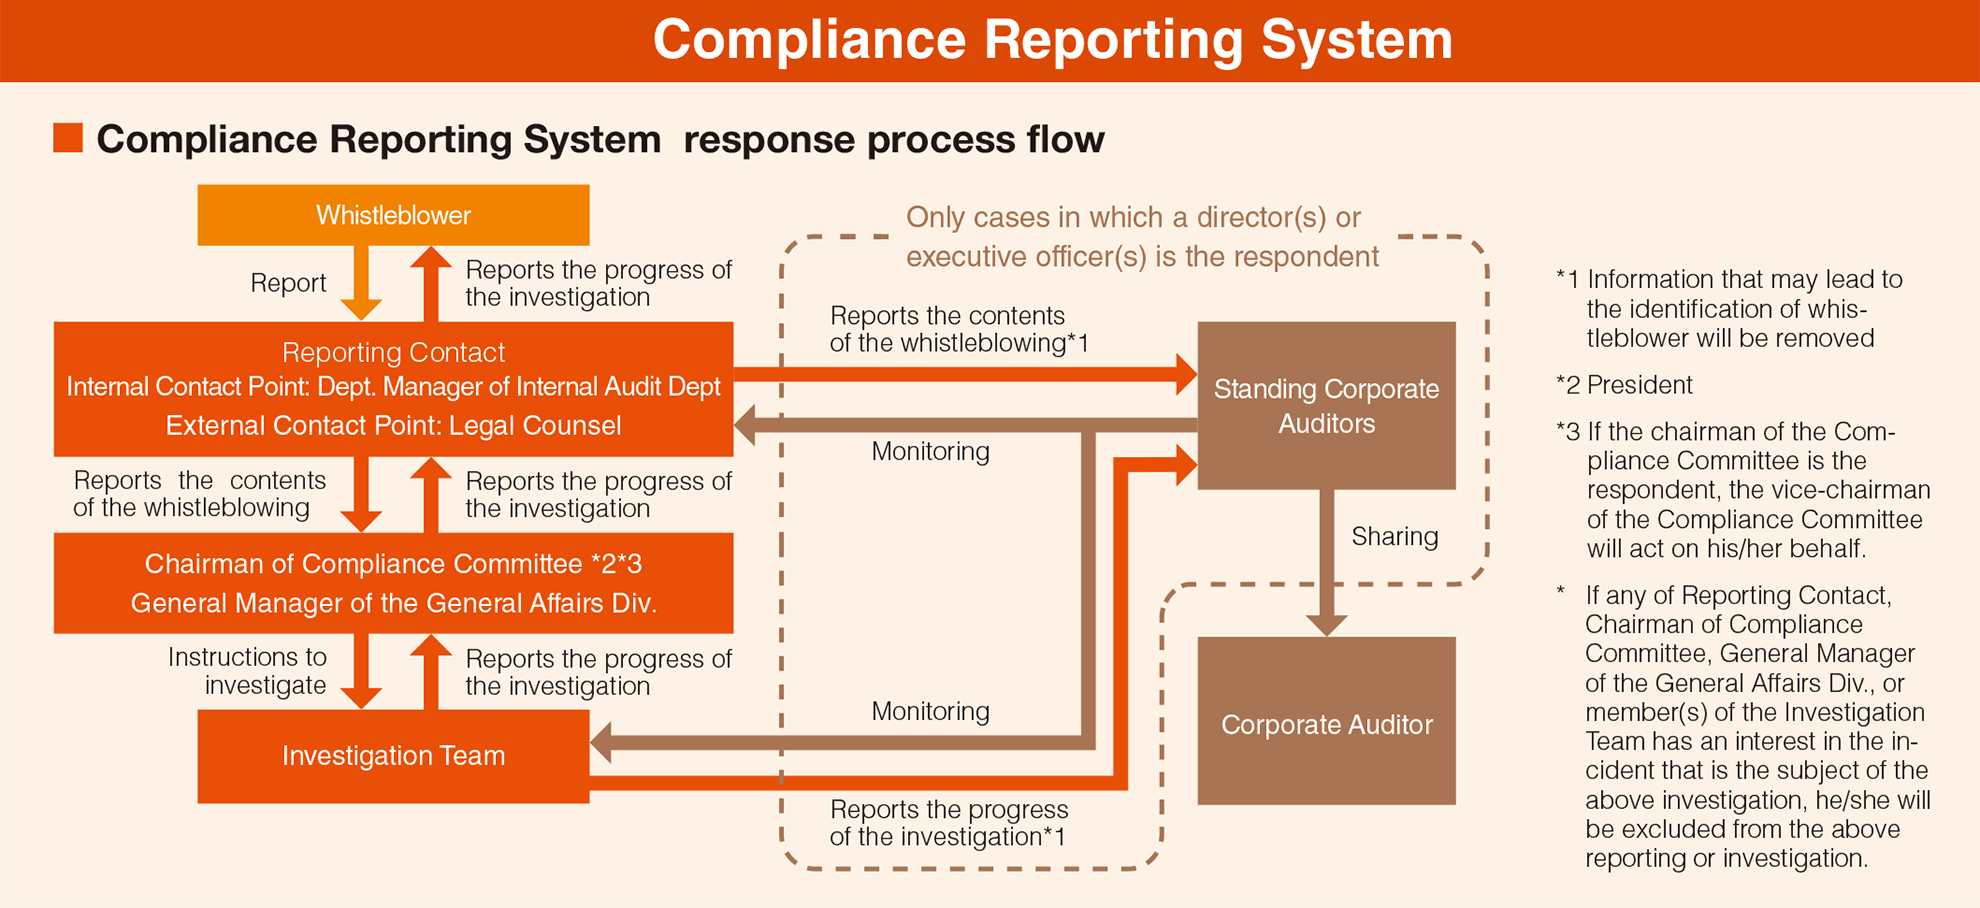 Compliance Reporting System response process flow